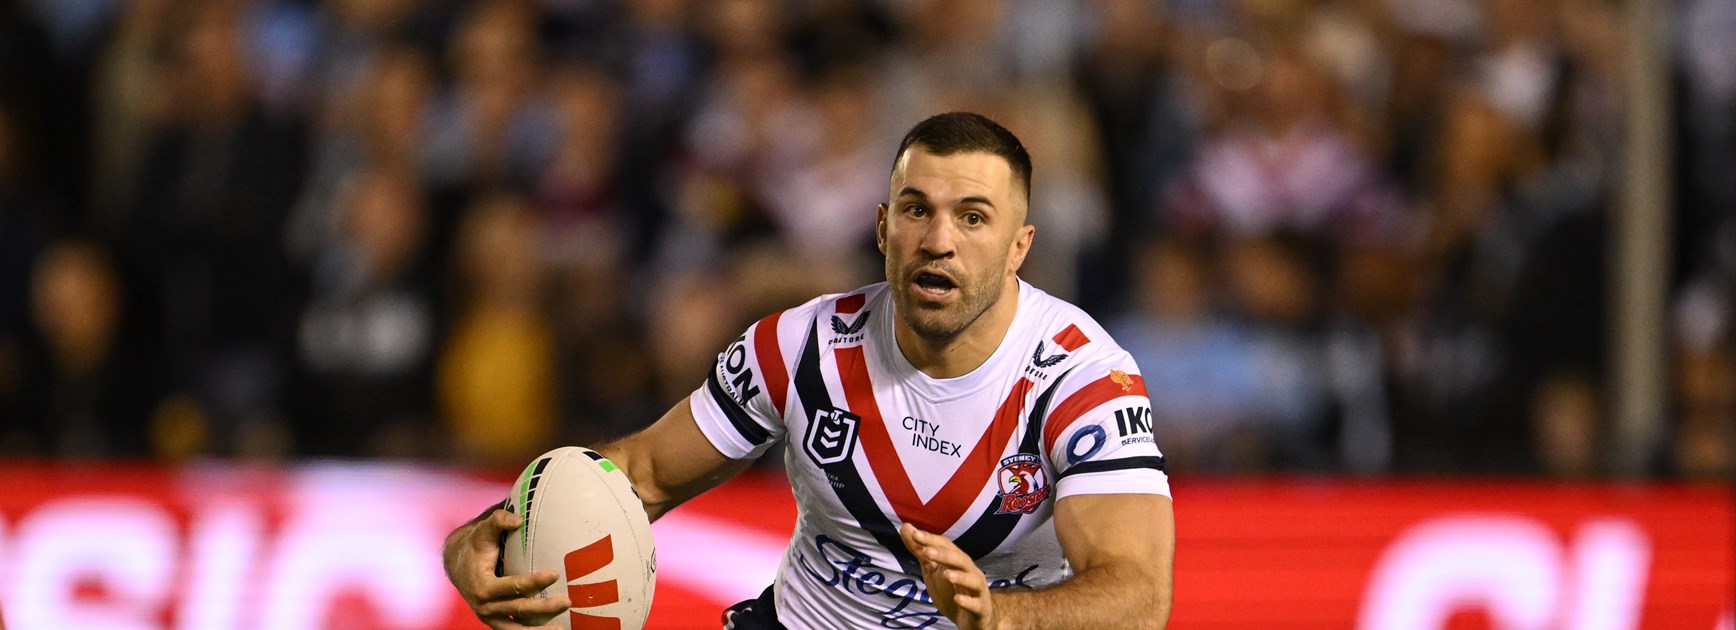 Roosters team list: Round 10 v Cowboys